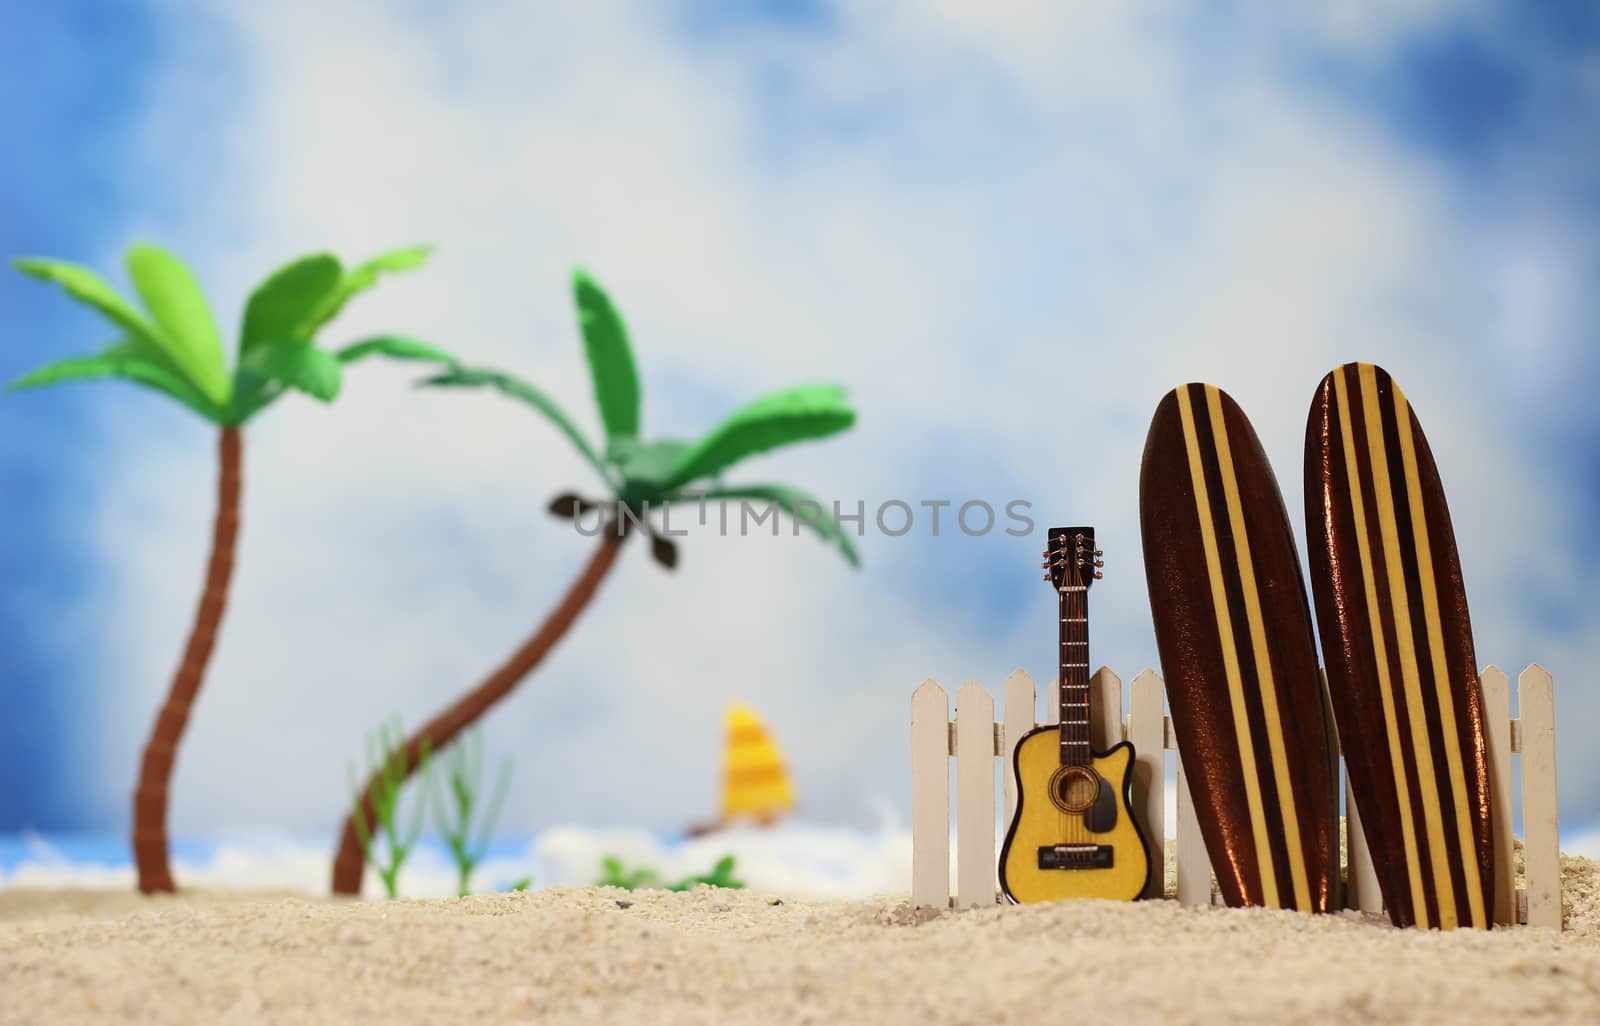 Surfboards on Tropical Beach - Shallow DOF, focus on top of guitar and fence